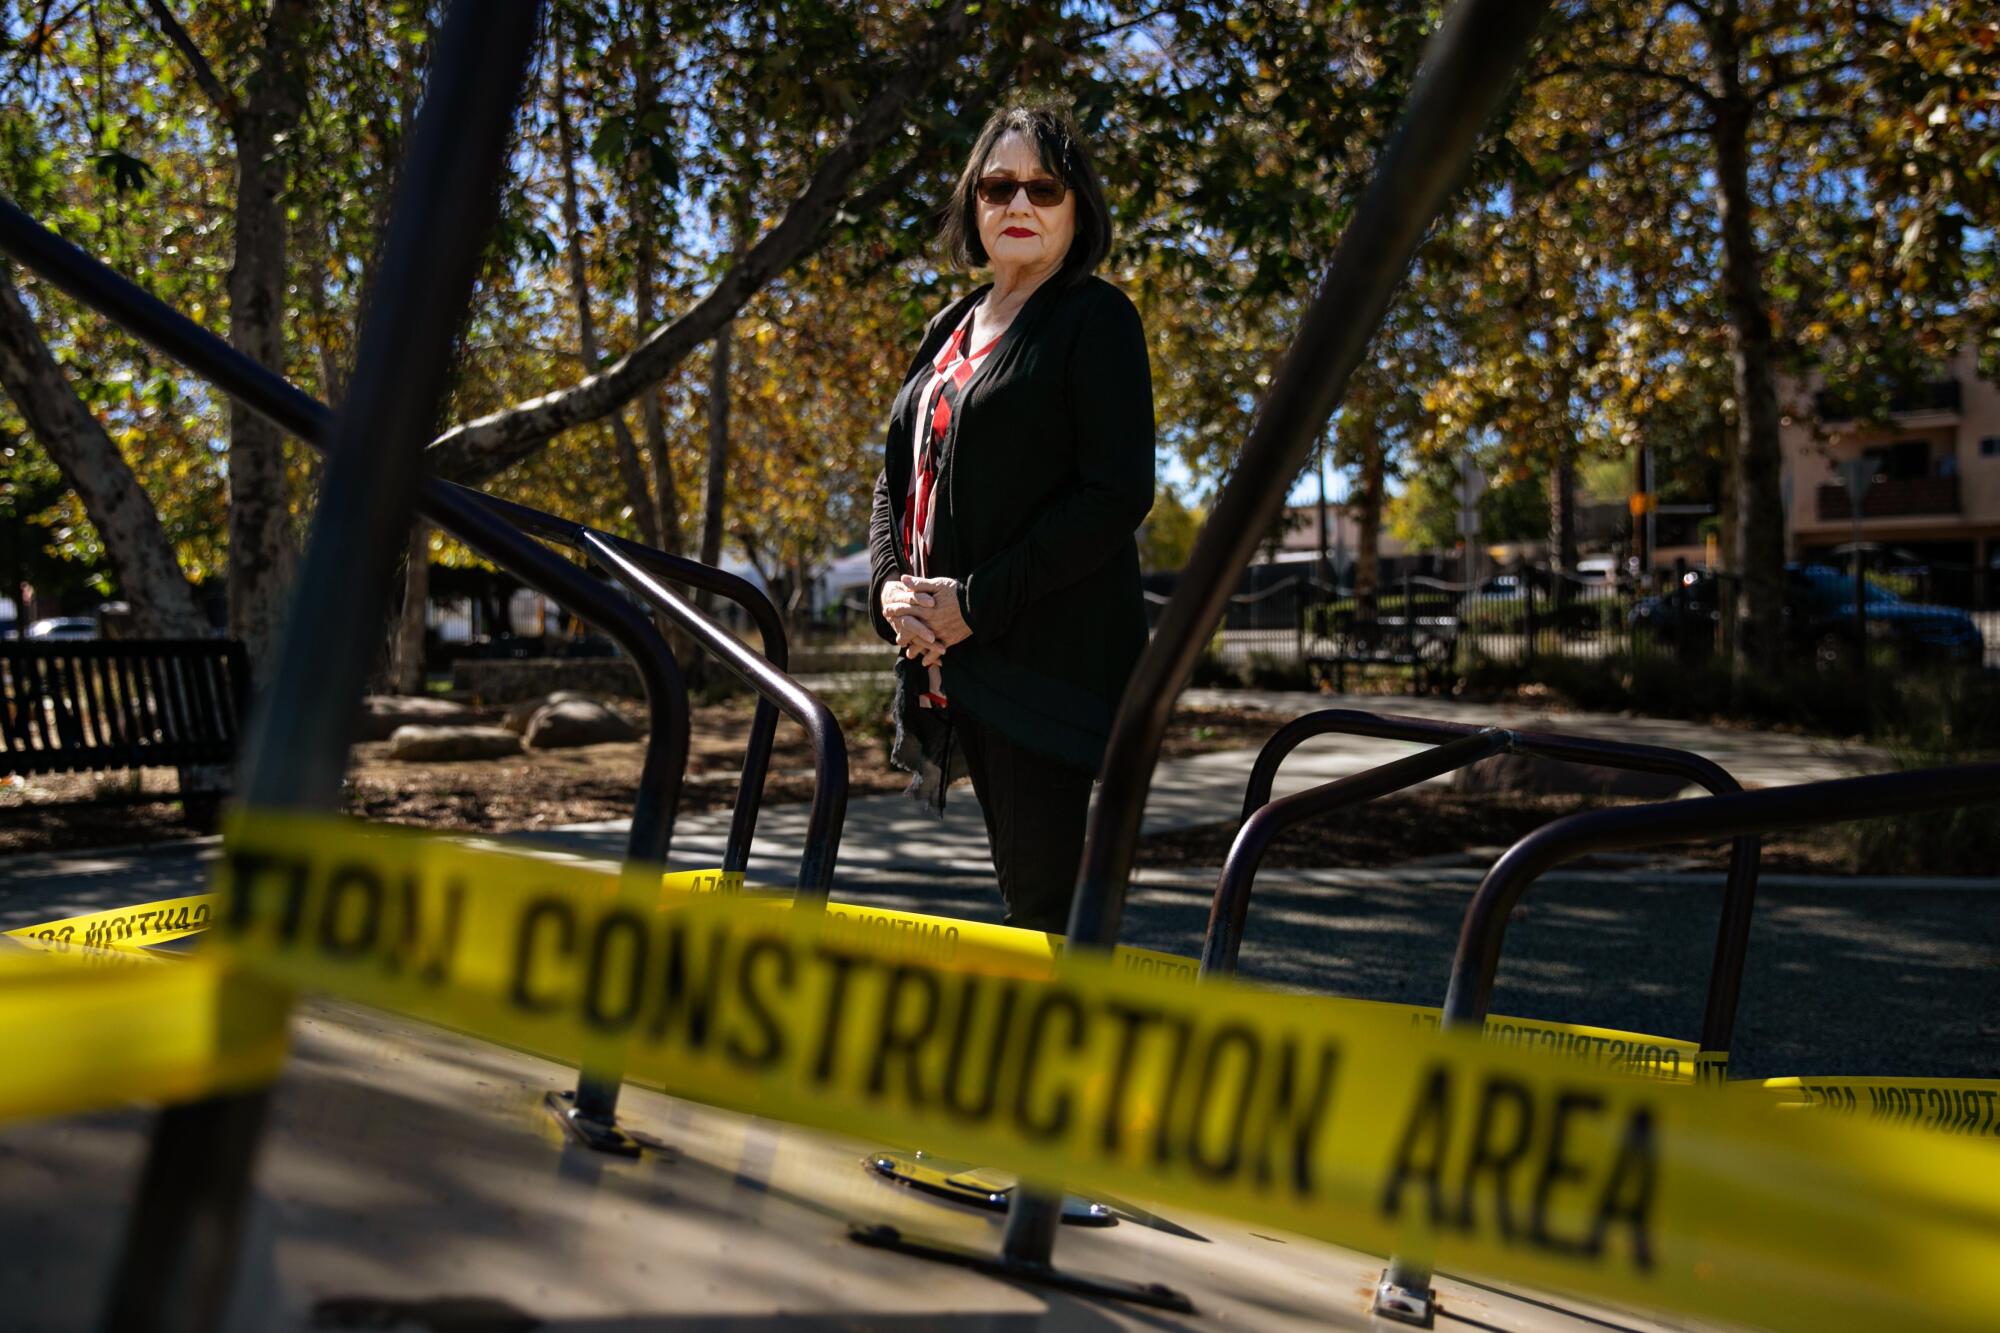 A woman stands next to playground equipment blocked off by yellow "construction area" tape.